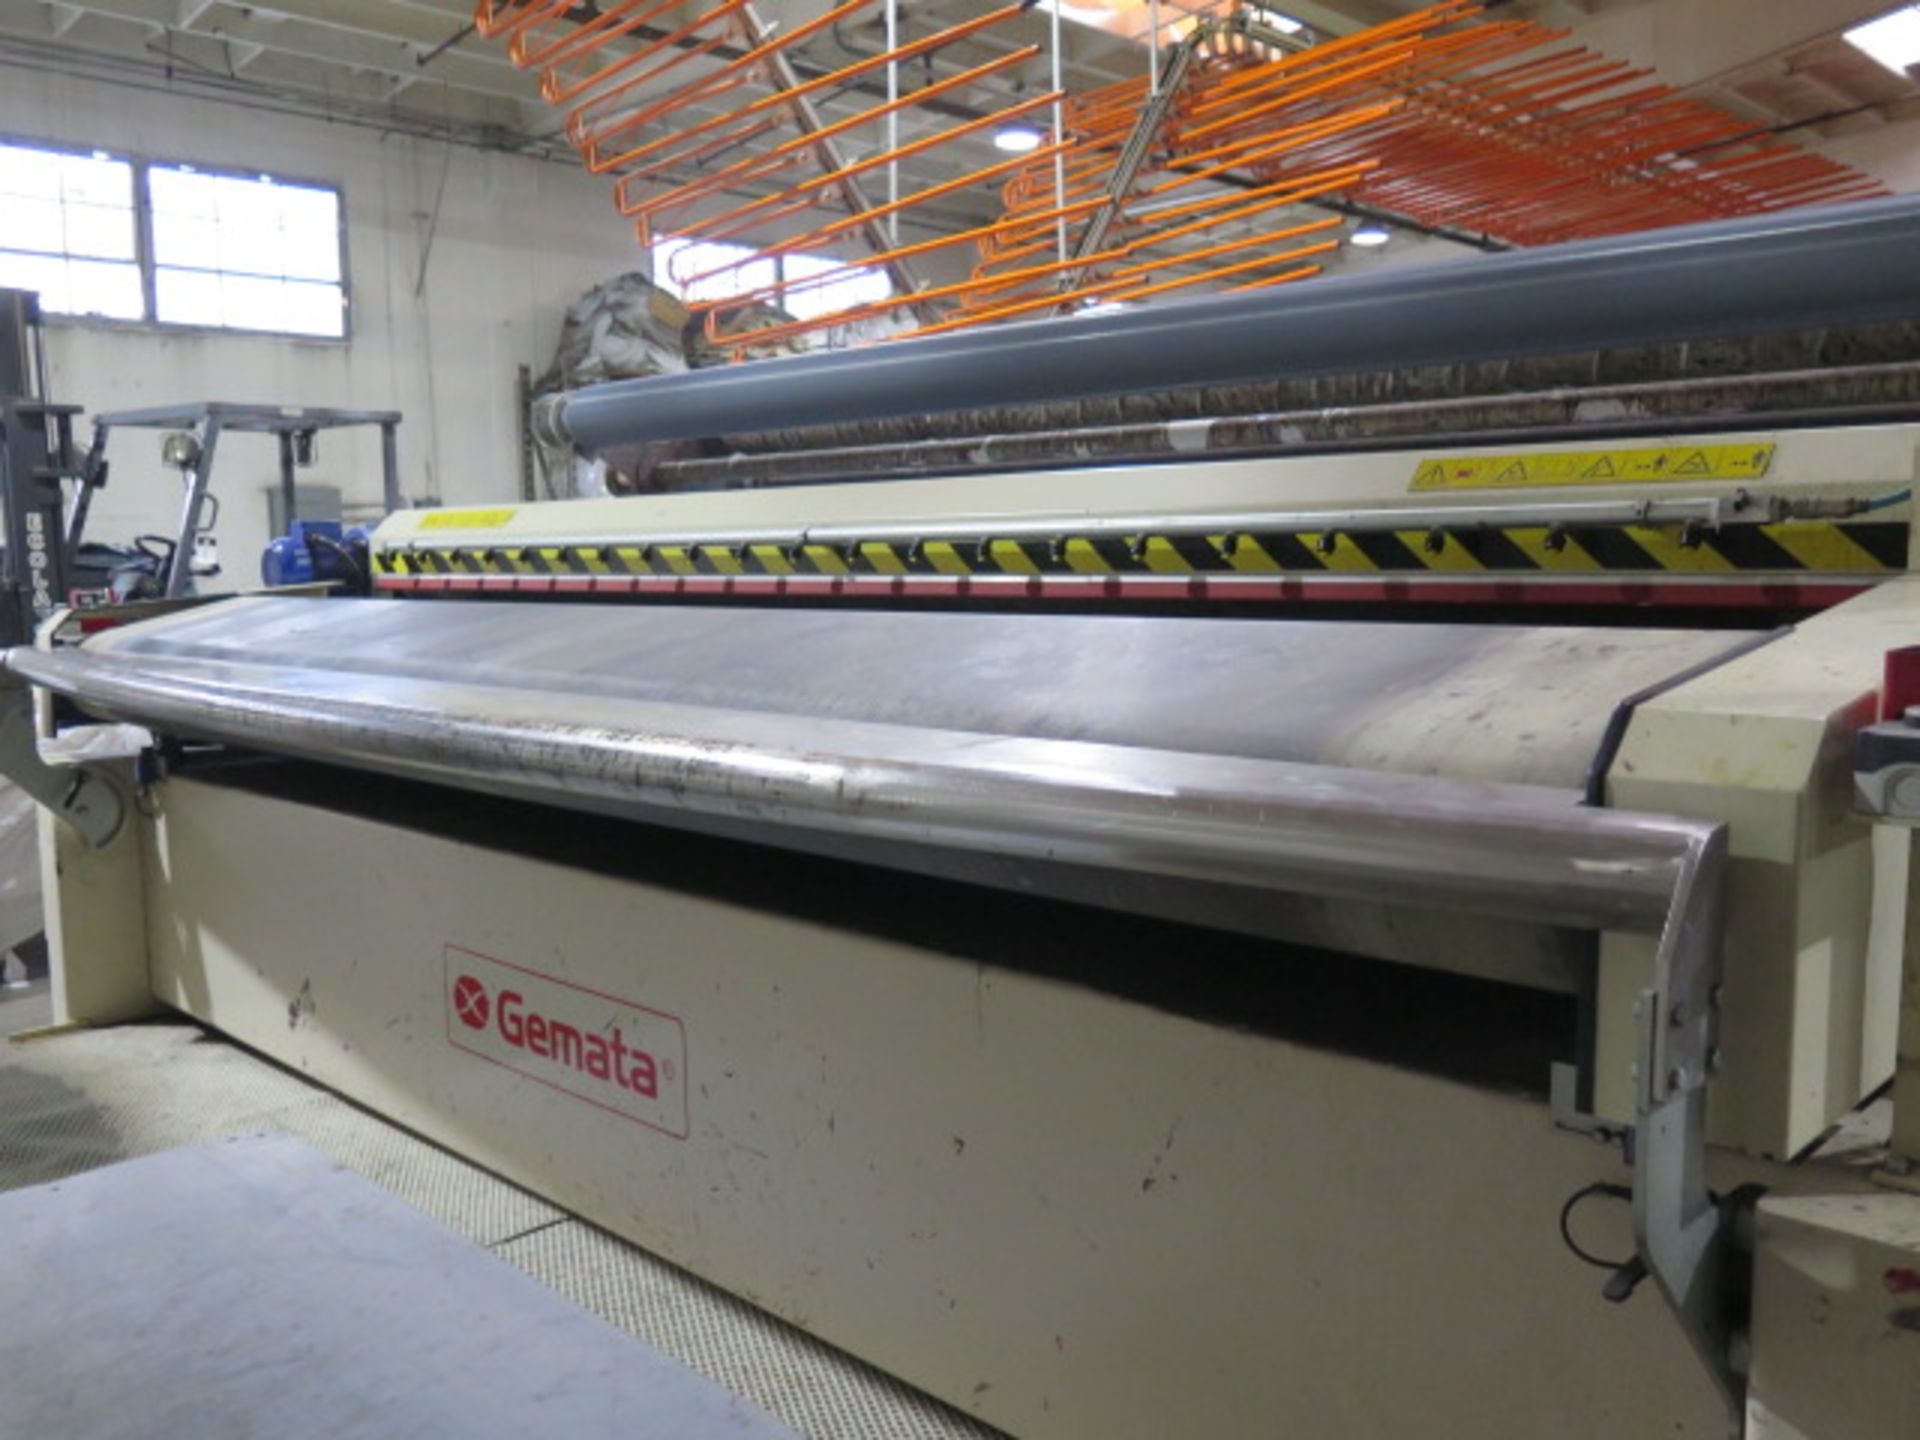 2015 Gemata Rifinizlone A Rullo “Megastar” 3400/3/15 Roller Pigment Coating Machine SOLD AS IS - Image 6 of 17